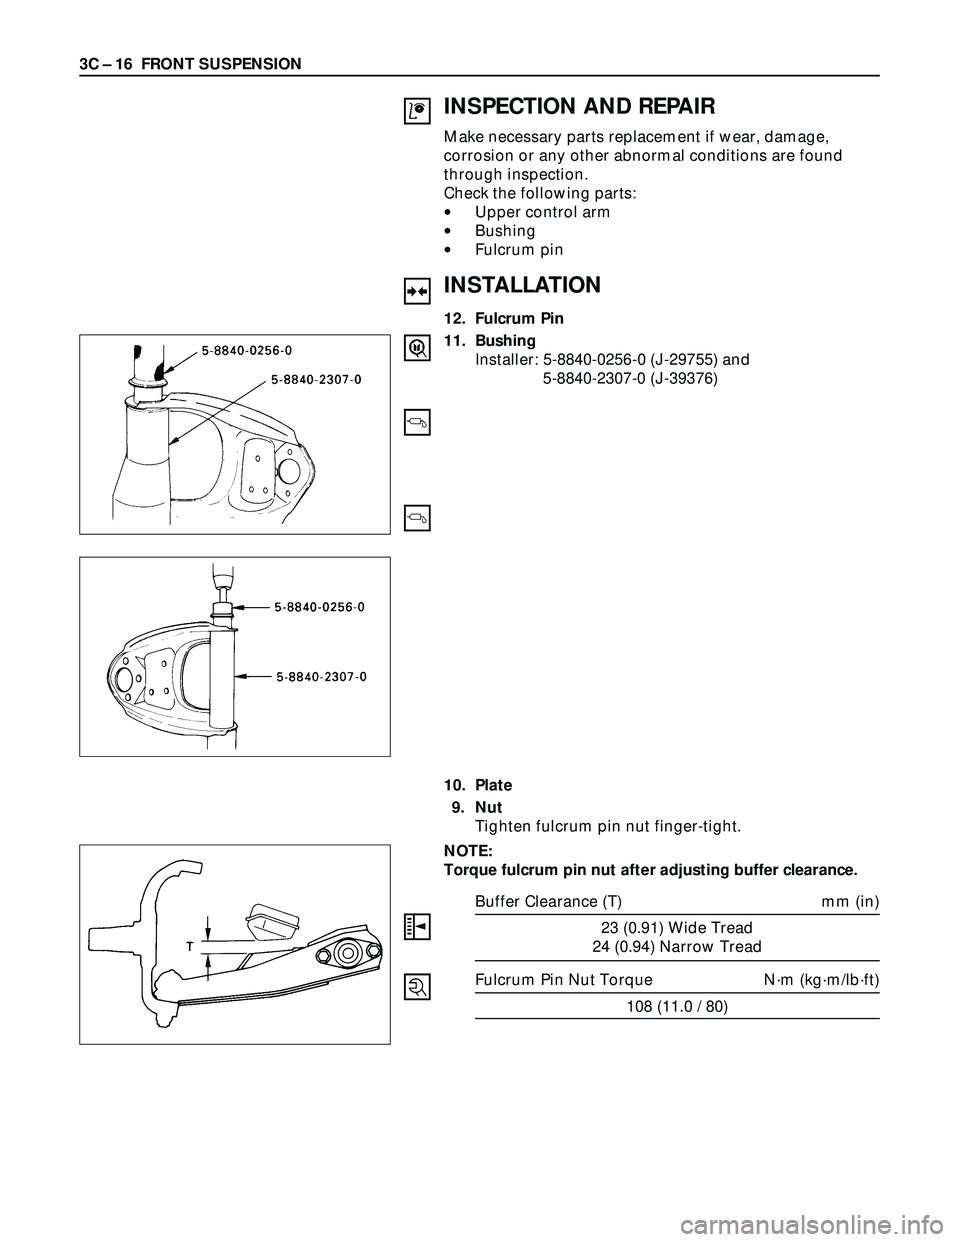 ISUZU TROOPER 1998  Service Repair Manual 3C – 16 FRONT SUSPENSION
INSPECTION AND REPAIR
Make necessary parts replacement if wear, damage,
corrosion or any other abnormal conditions are found
through inspection.
Check the following parts:
�